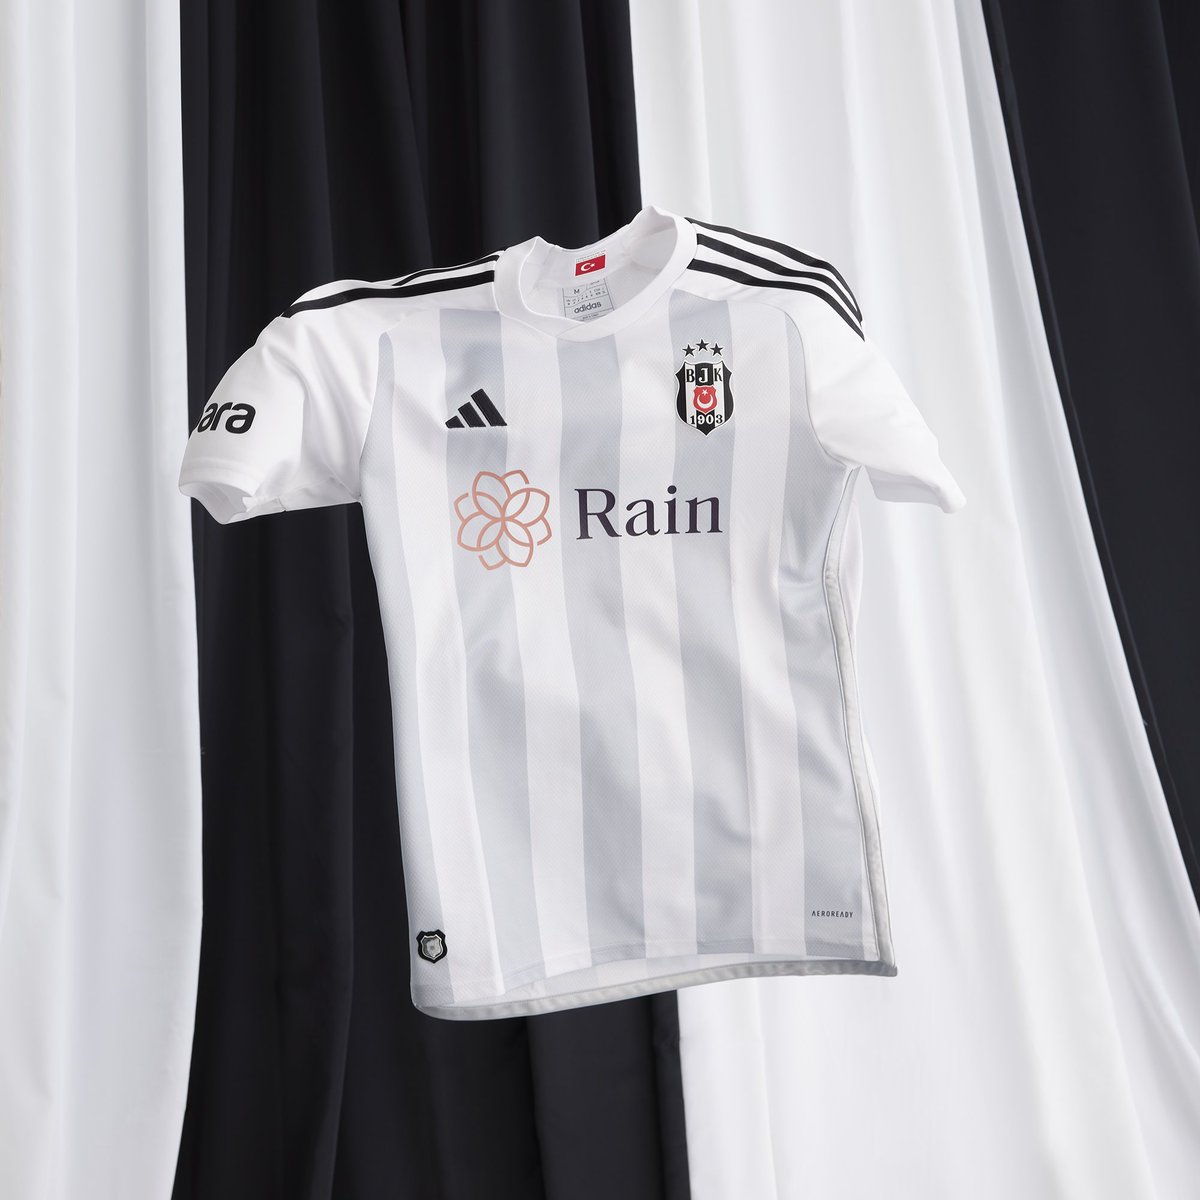 Feast your eyes on the stunning new jerseys that Beşiktaş will proudly don in the 2023-2024 season! Get ready for a season filled with excitement, victories, and unforgettable moments. Let’s conquer the field, Beşiktaş! 🦅